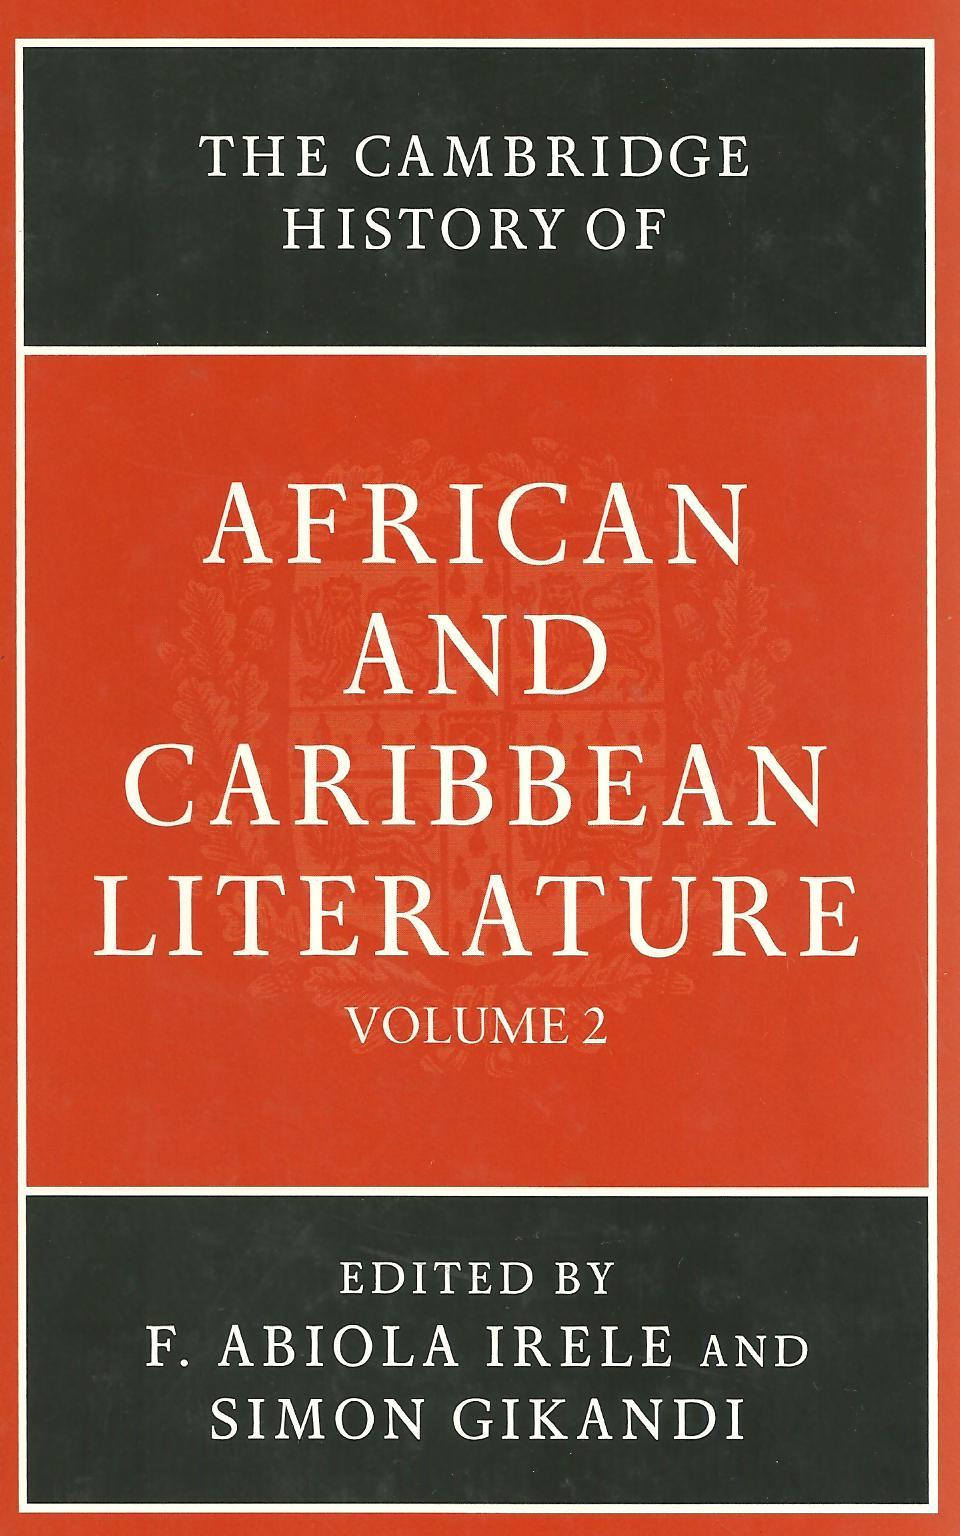 AFRICAN AND CARIBBEAN LITERATURE